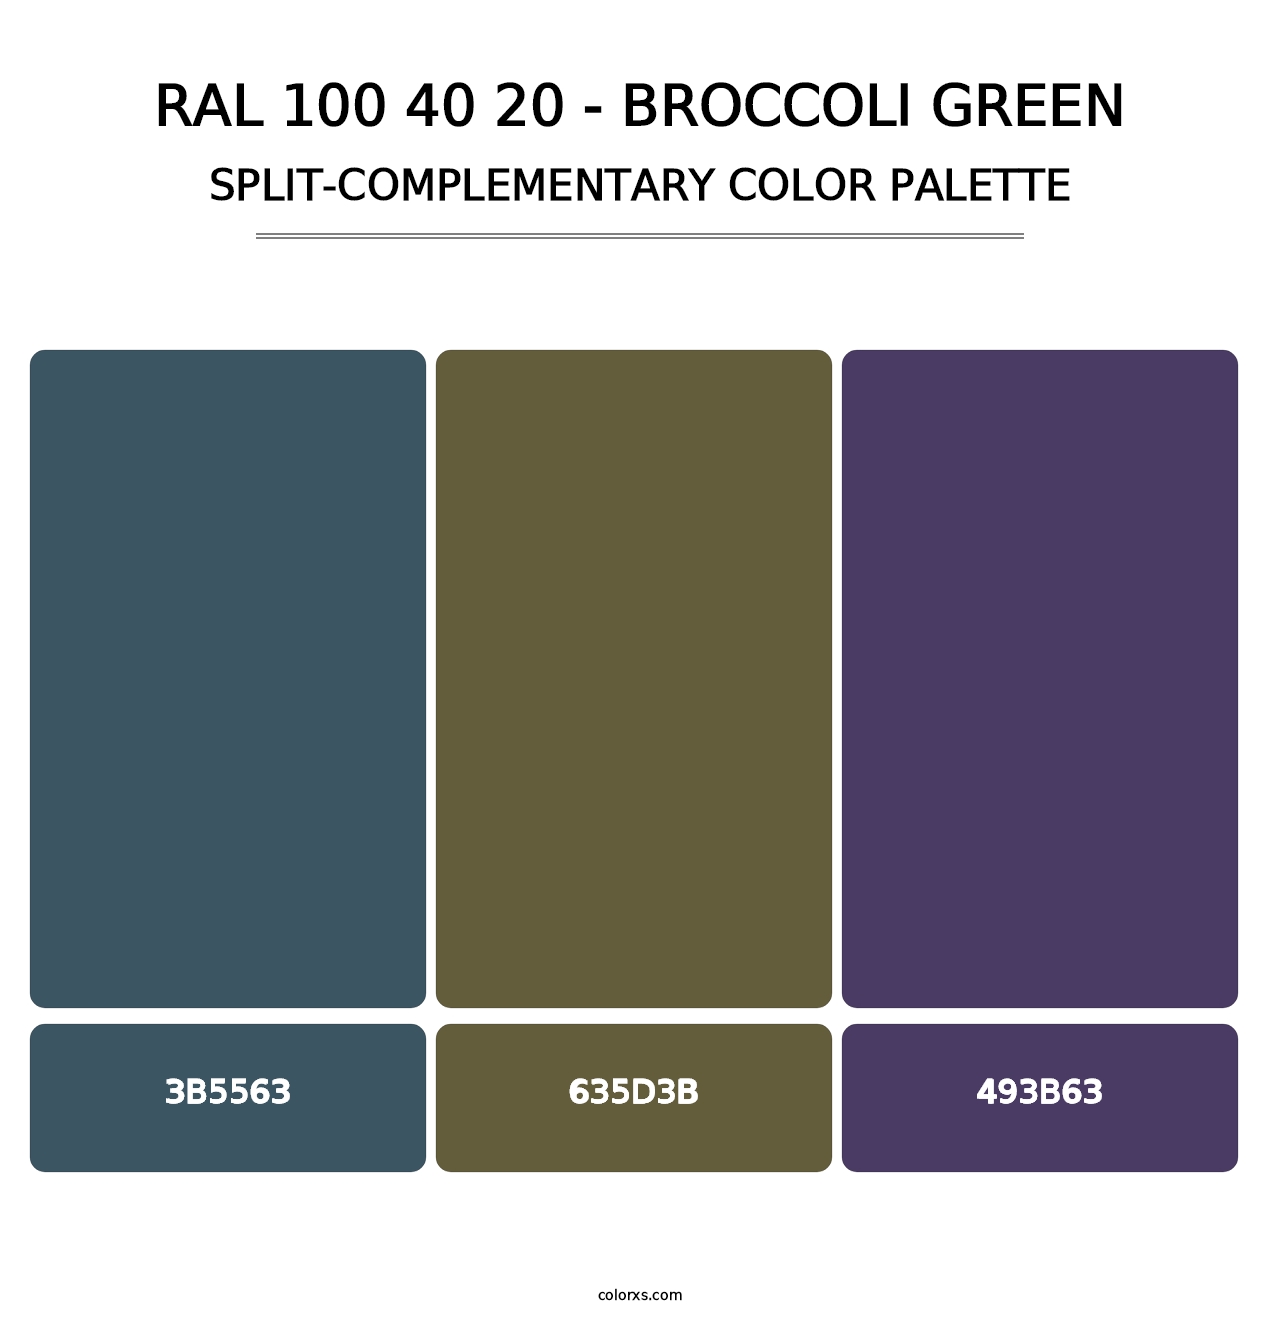 RAL 100 40 20 - Broccoli Green - Split-Complementary Color Palette